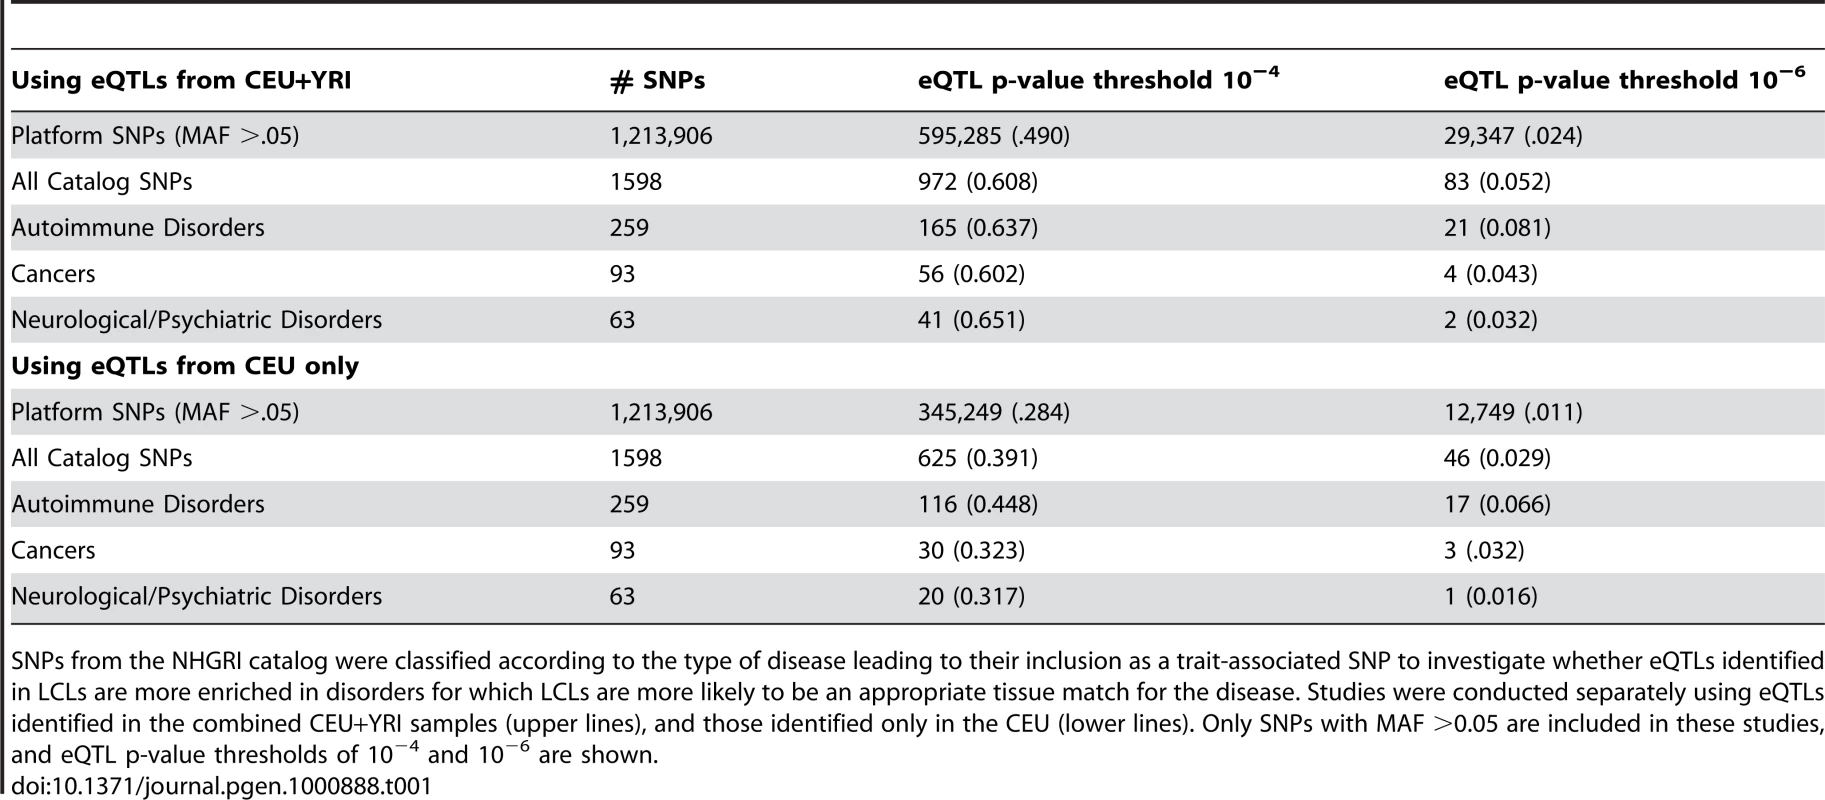 Number (proportion) of SNPs classified as eQTLs for diseases with different focal tissues.